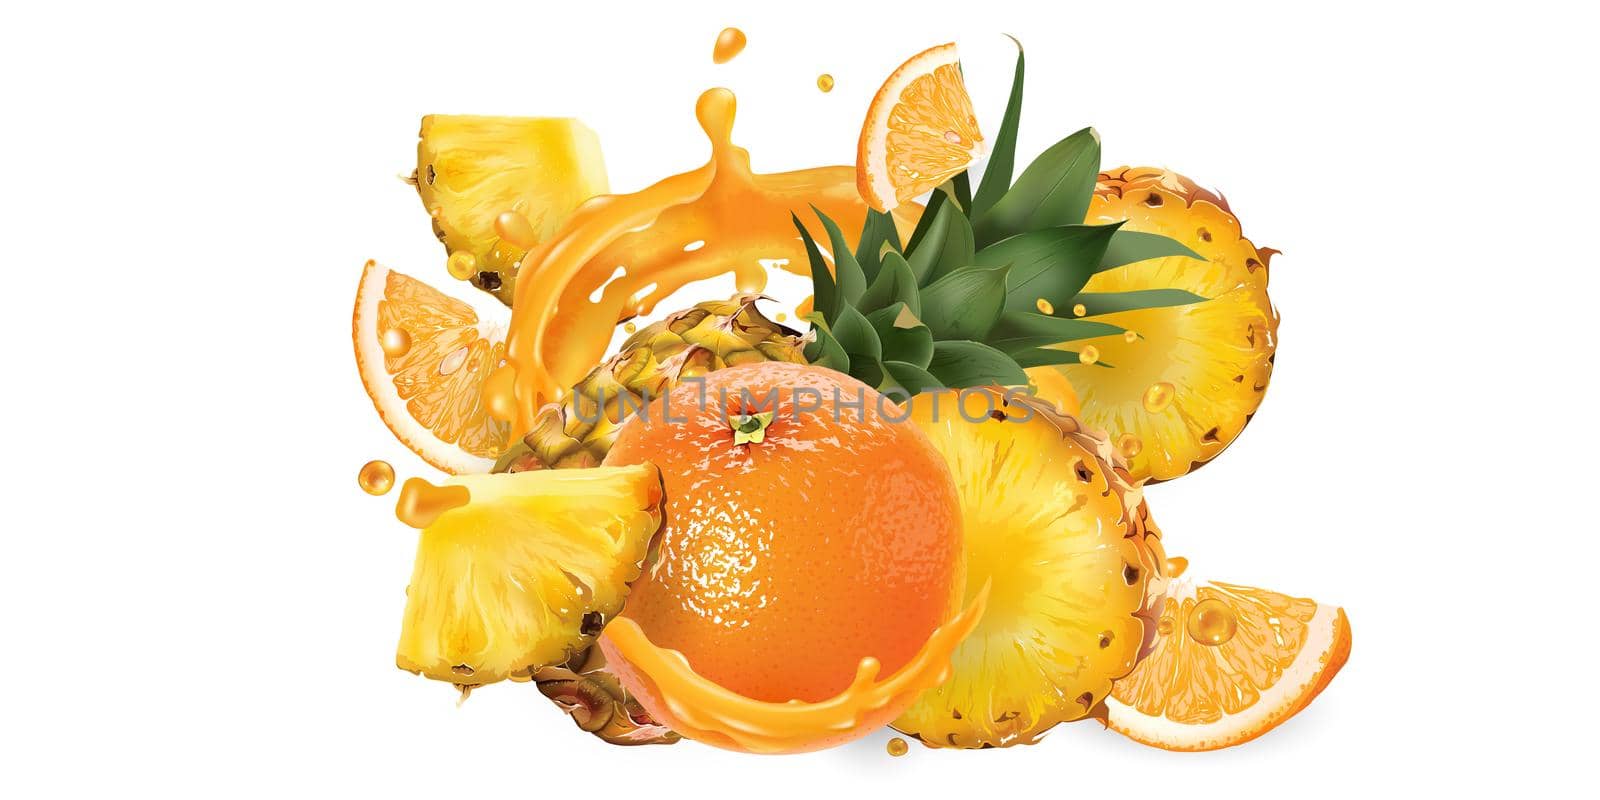 Whole and sliced pineapples and oranges in fruit juice splashes on a white background. Realistic style illustration.